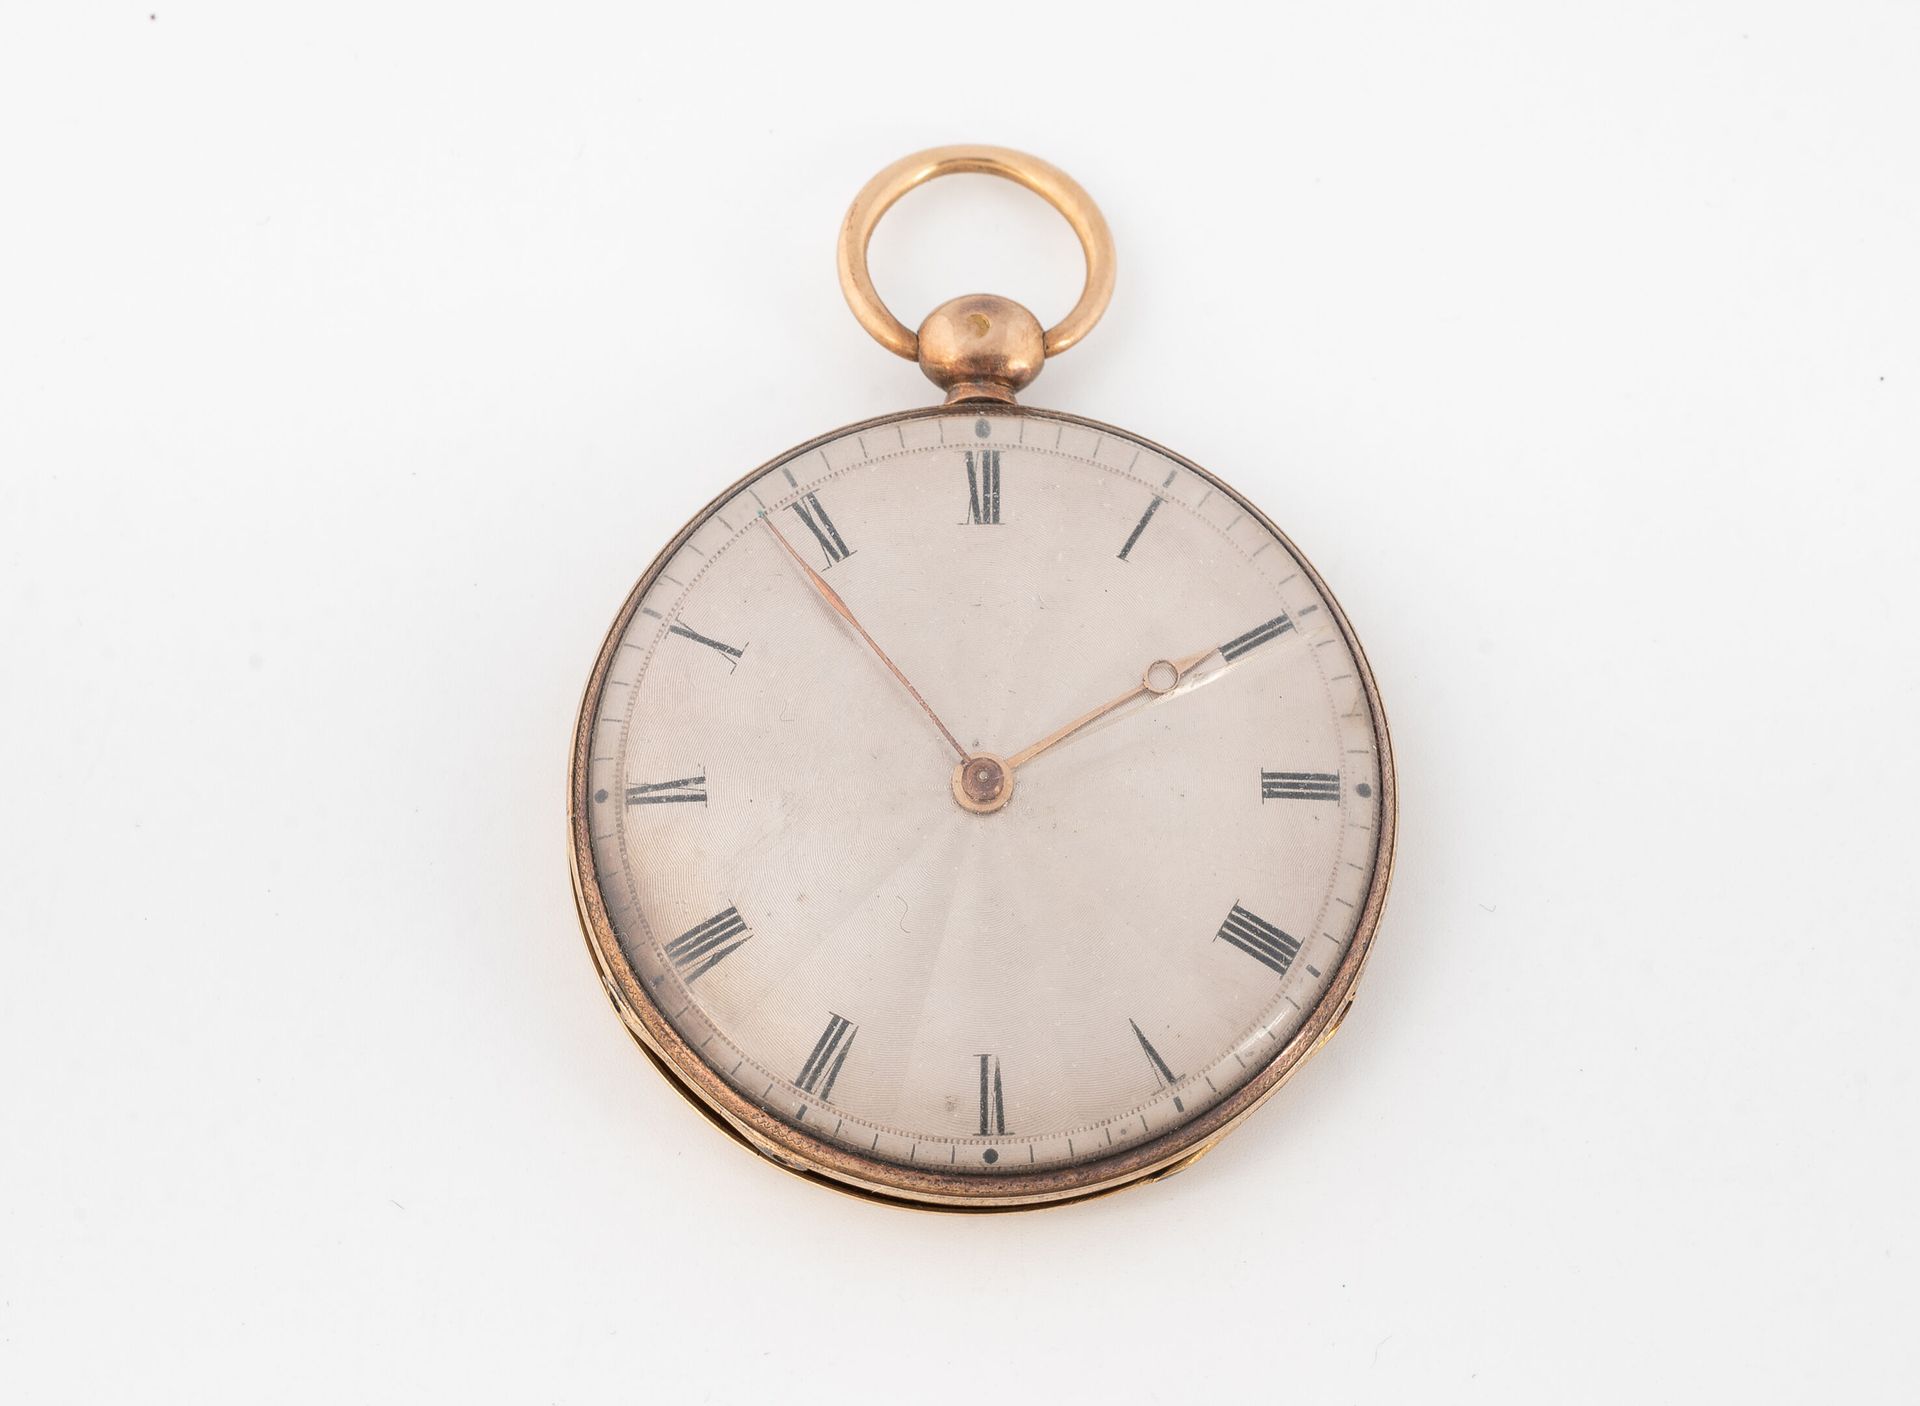 Lainé Jeune à Argentan Pocket watch in yellow gold (750).
Back cover with radiat&hellip;